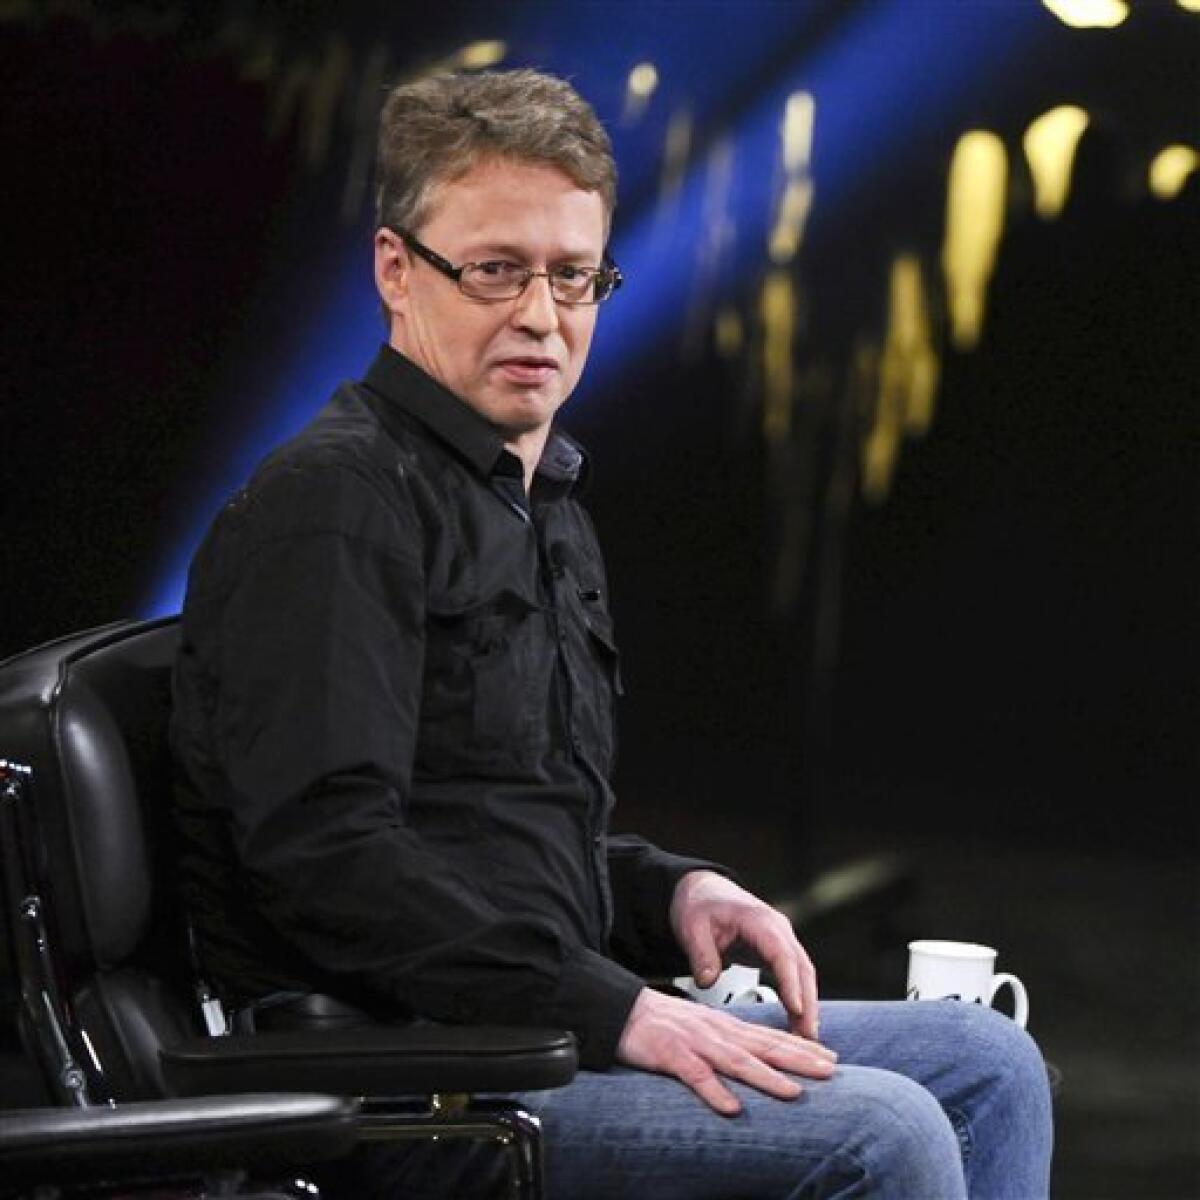 In this photo taken Thursday Jan. 20, 2011, Joakim Larsson, brother of writer Stieg Larsson is seen appearing on a talk show aired on Friday, at SVT television network in Stockholm, Sweden. Stieg Larsson's brother has rejected claims by the late crime novelist's longtime companion that the family is trying to squeeze every penny from Larsson's posthumous fame. On a talk show to be aired by Swedish Television, Joakim Larsson says he and his father, who inherited the author's estate, plan to donate most of the 250 million kronor ($38 million) they have earned from the popular books to charity. (AP Photo/Scanpix Sweden/Claudio Bresciani) SWEDEN OUT